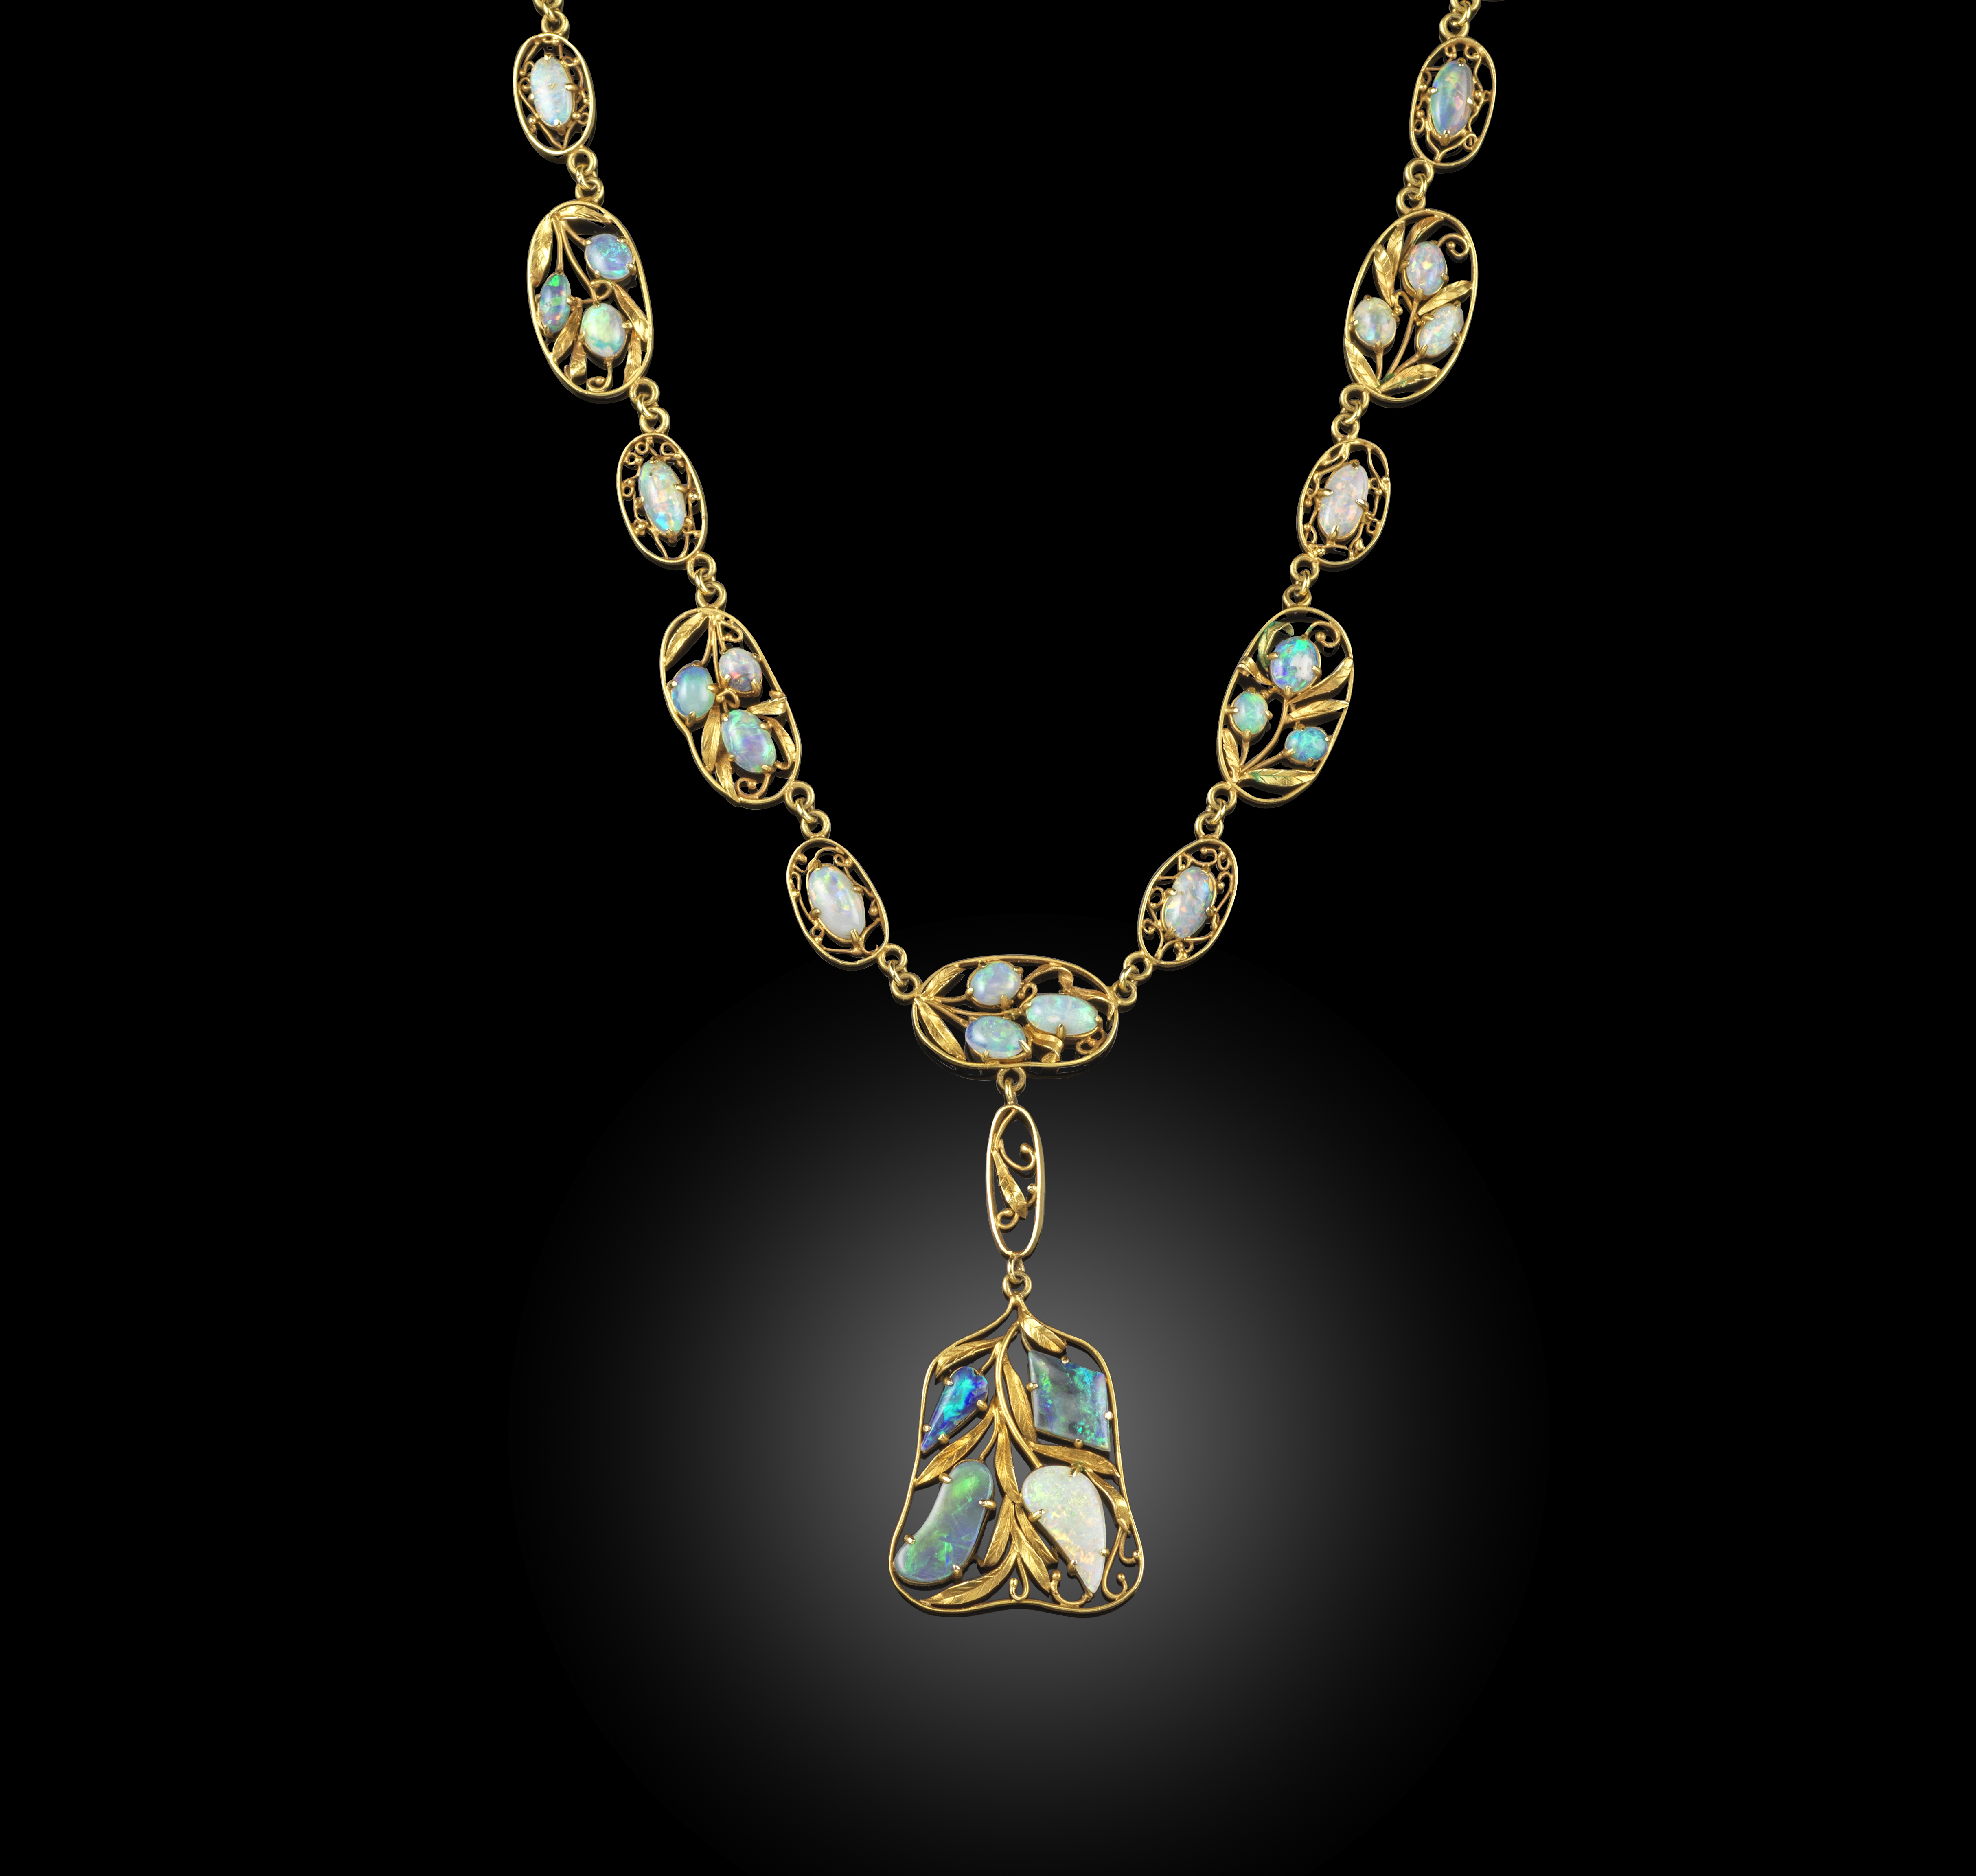 An Arts and Crafts opal necklace, early 20th century, designed as a series of oval foliate links set